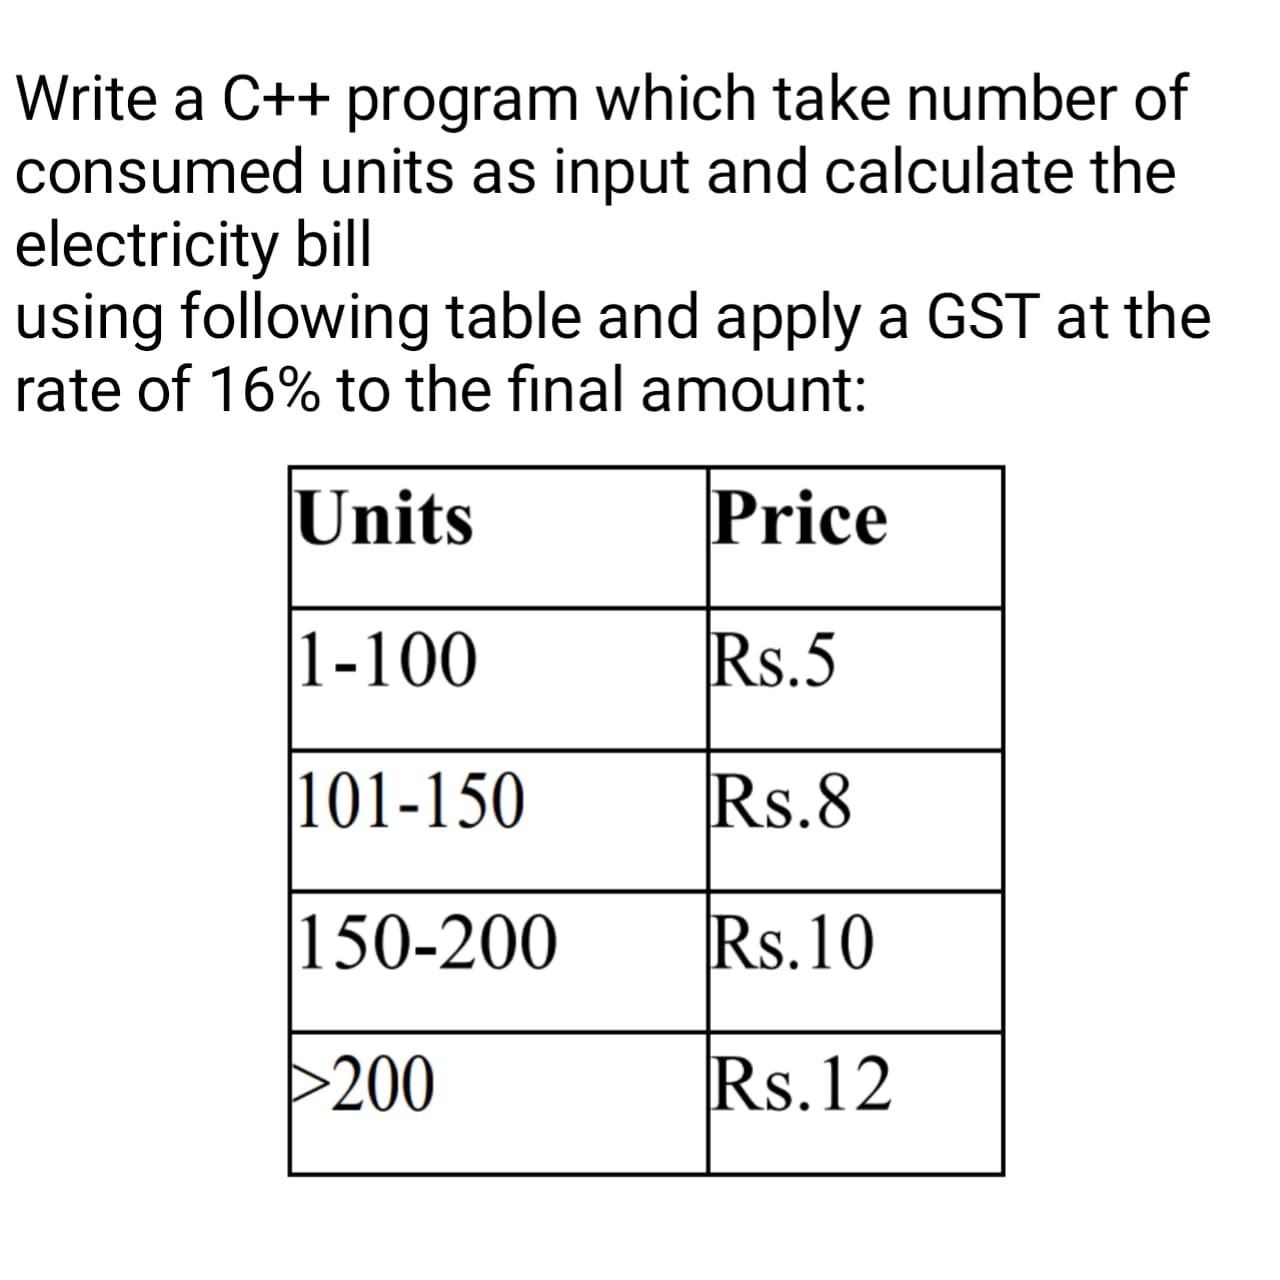 Write a C++ program which take numbe
consumed units as input and calculate
electricity bill
using following table and apply a GST at
rate of 16% to the final amount:
Units
Price
1-100
Rs.5
|101-150
Rs.8
|150-200
Rs.10
>200
Rs.12
